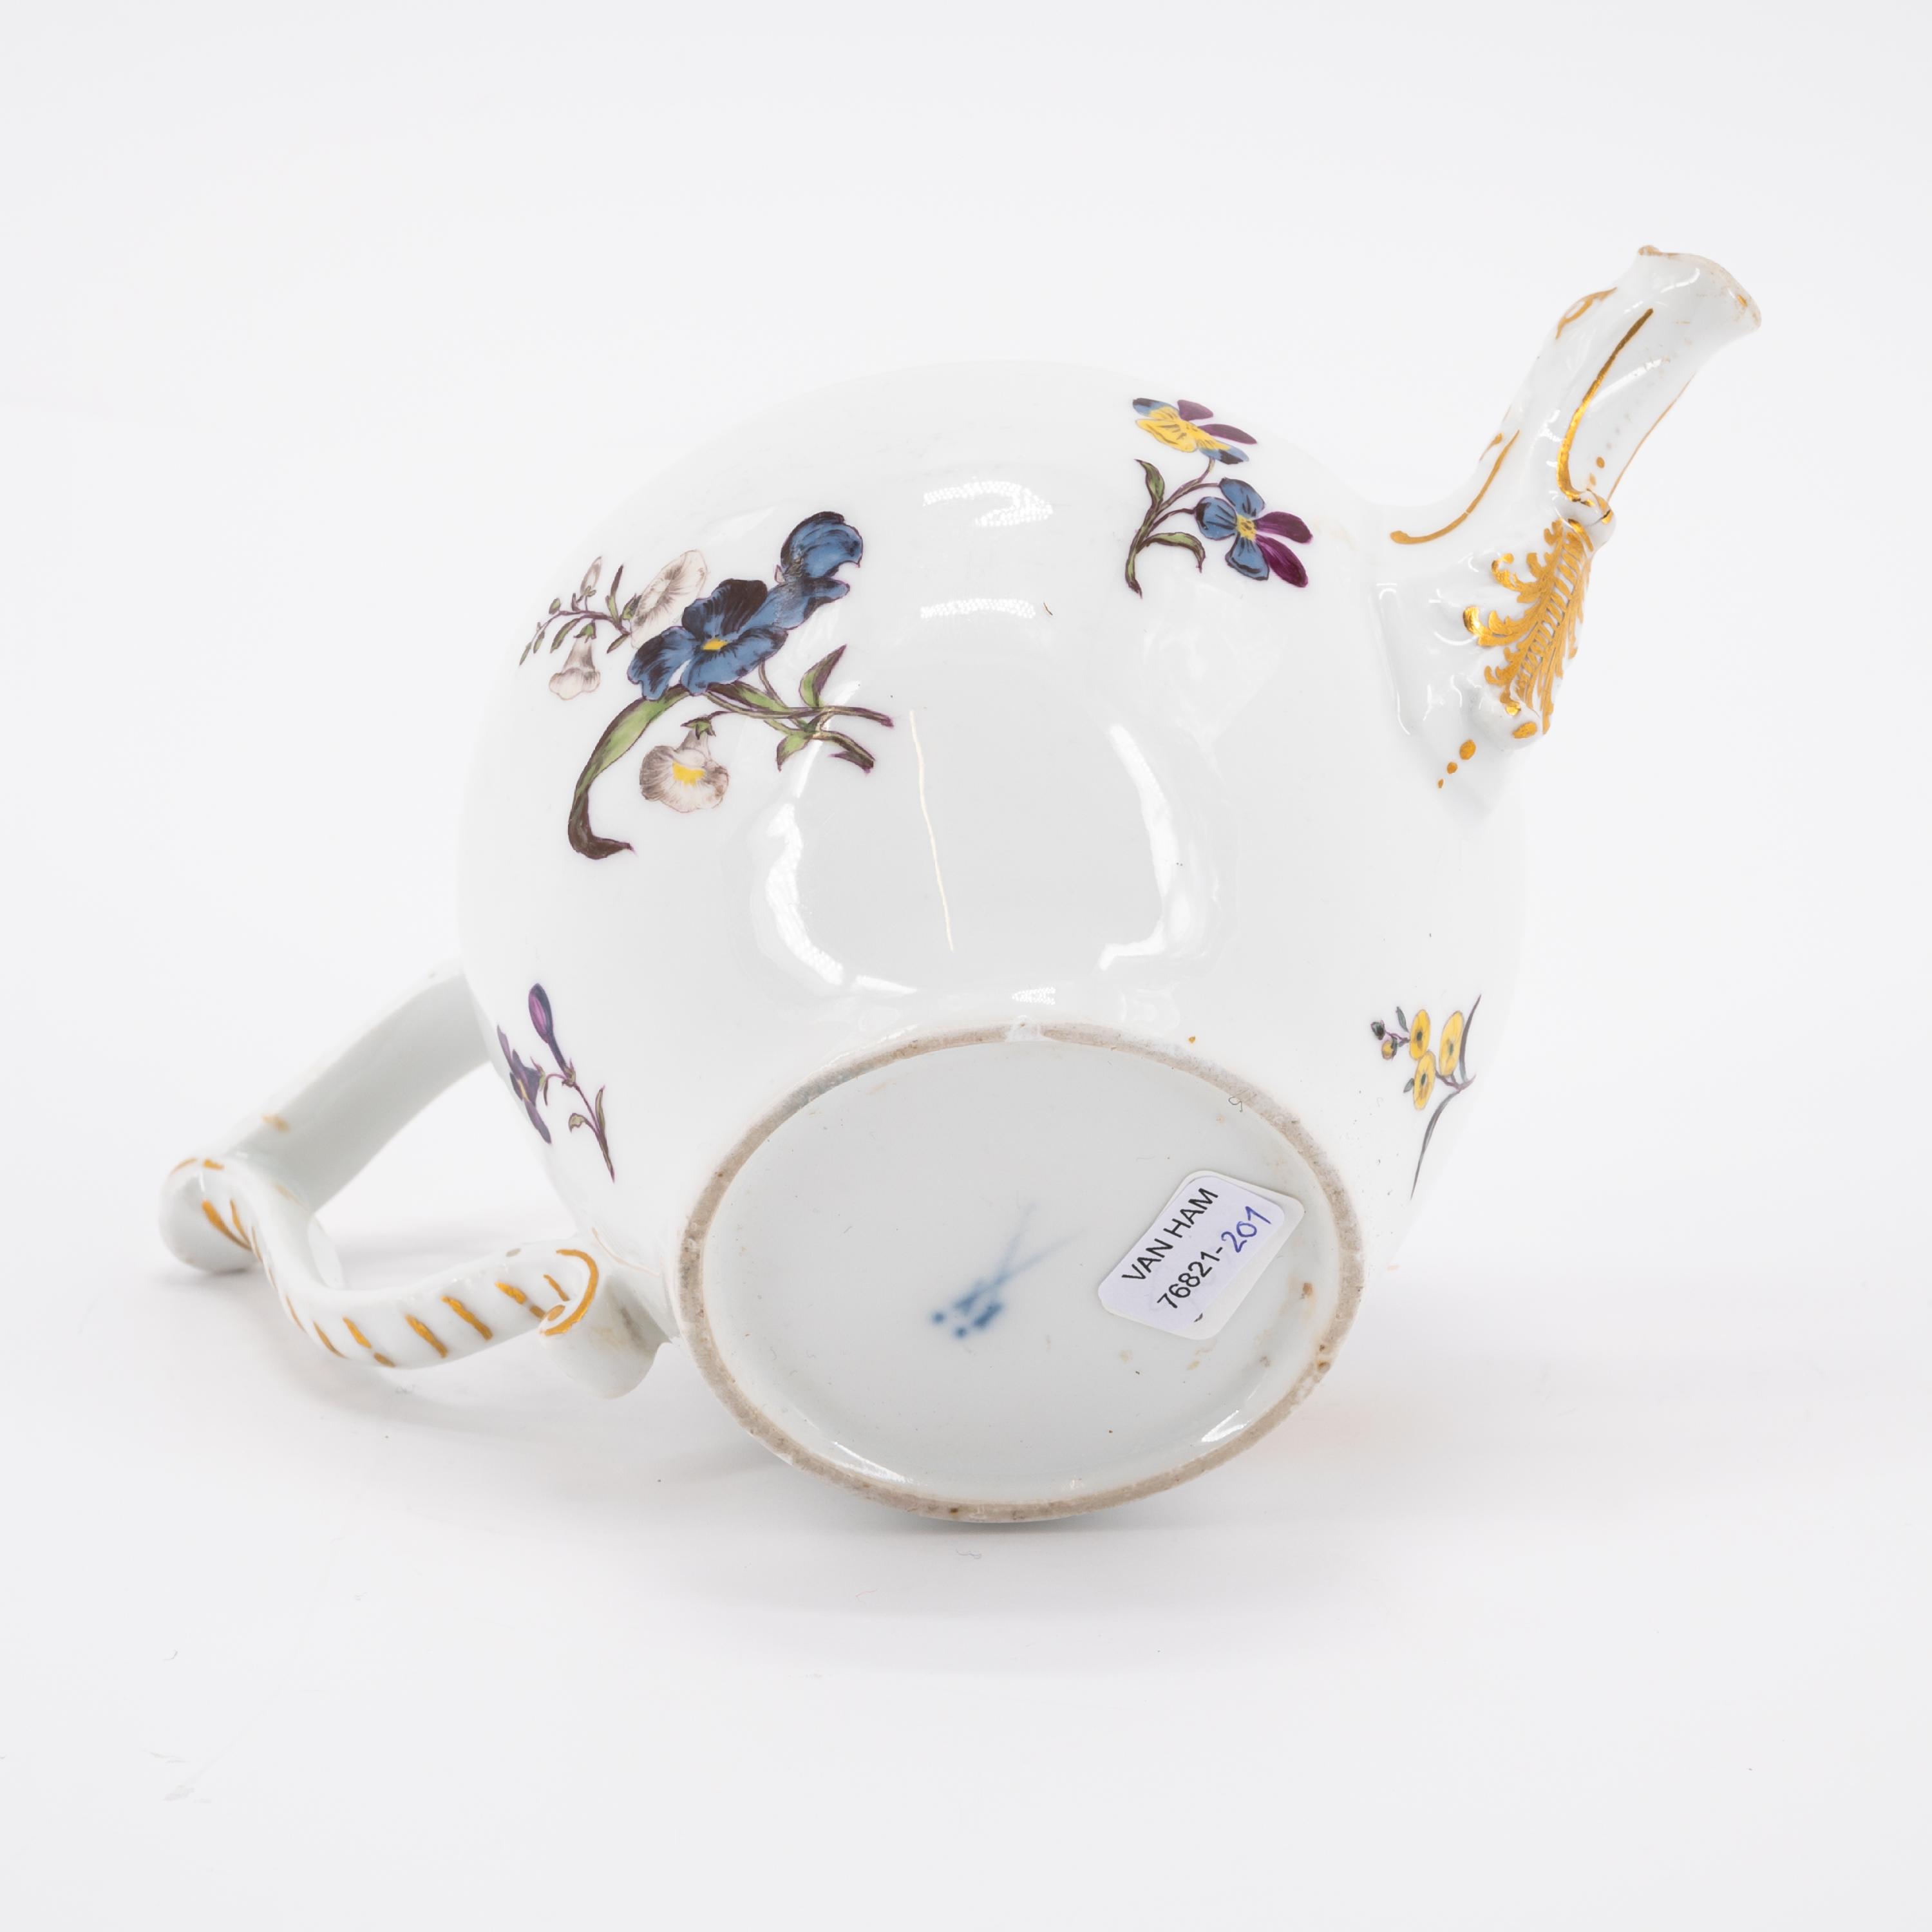 LARGE PORCELAIN LIDDED BOWL WITH FLOWER KNOB, SMALL TEA POT WITH WOODCUT FLOWERS AND CUP WITH SAUCER - Image 11 of 18